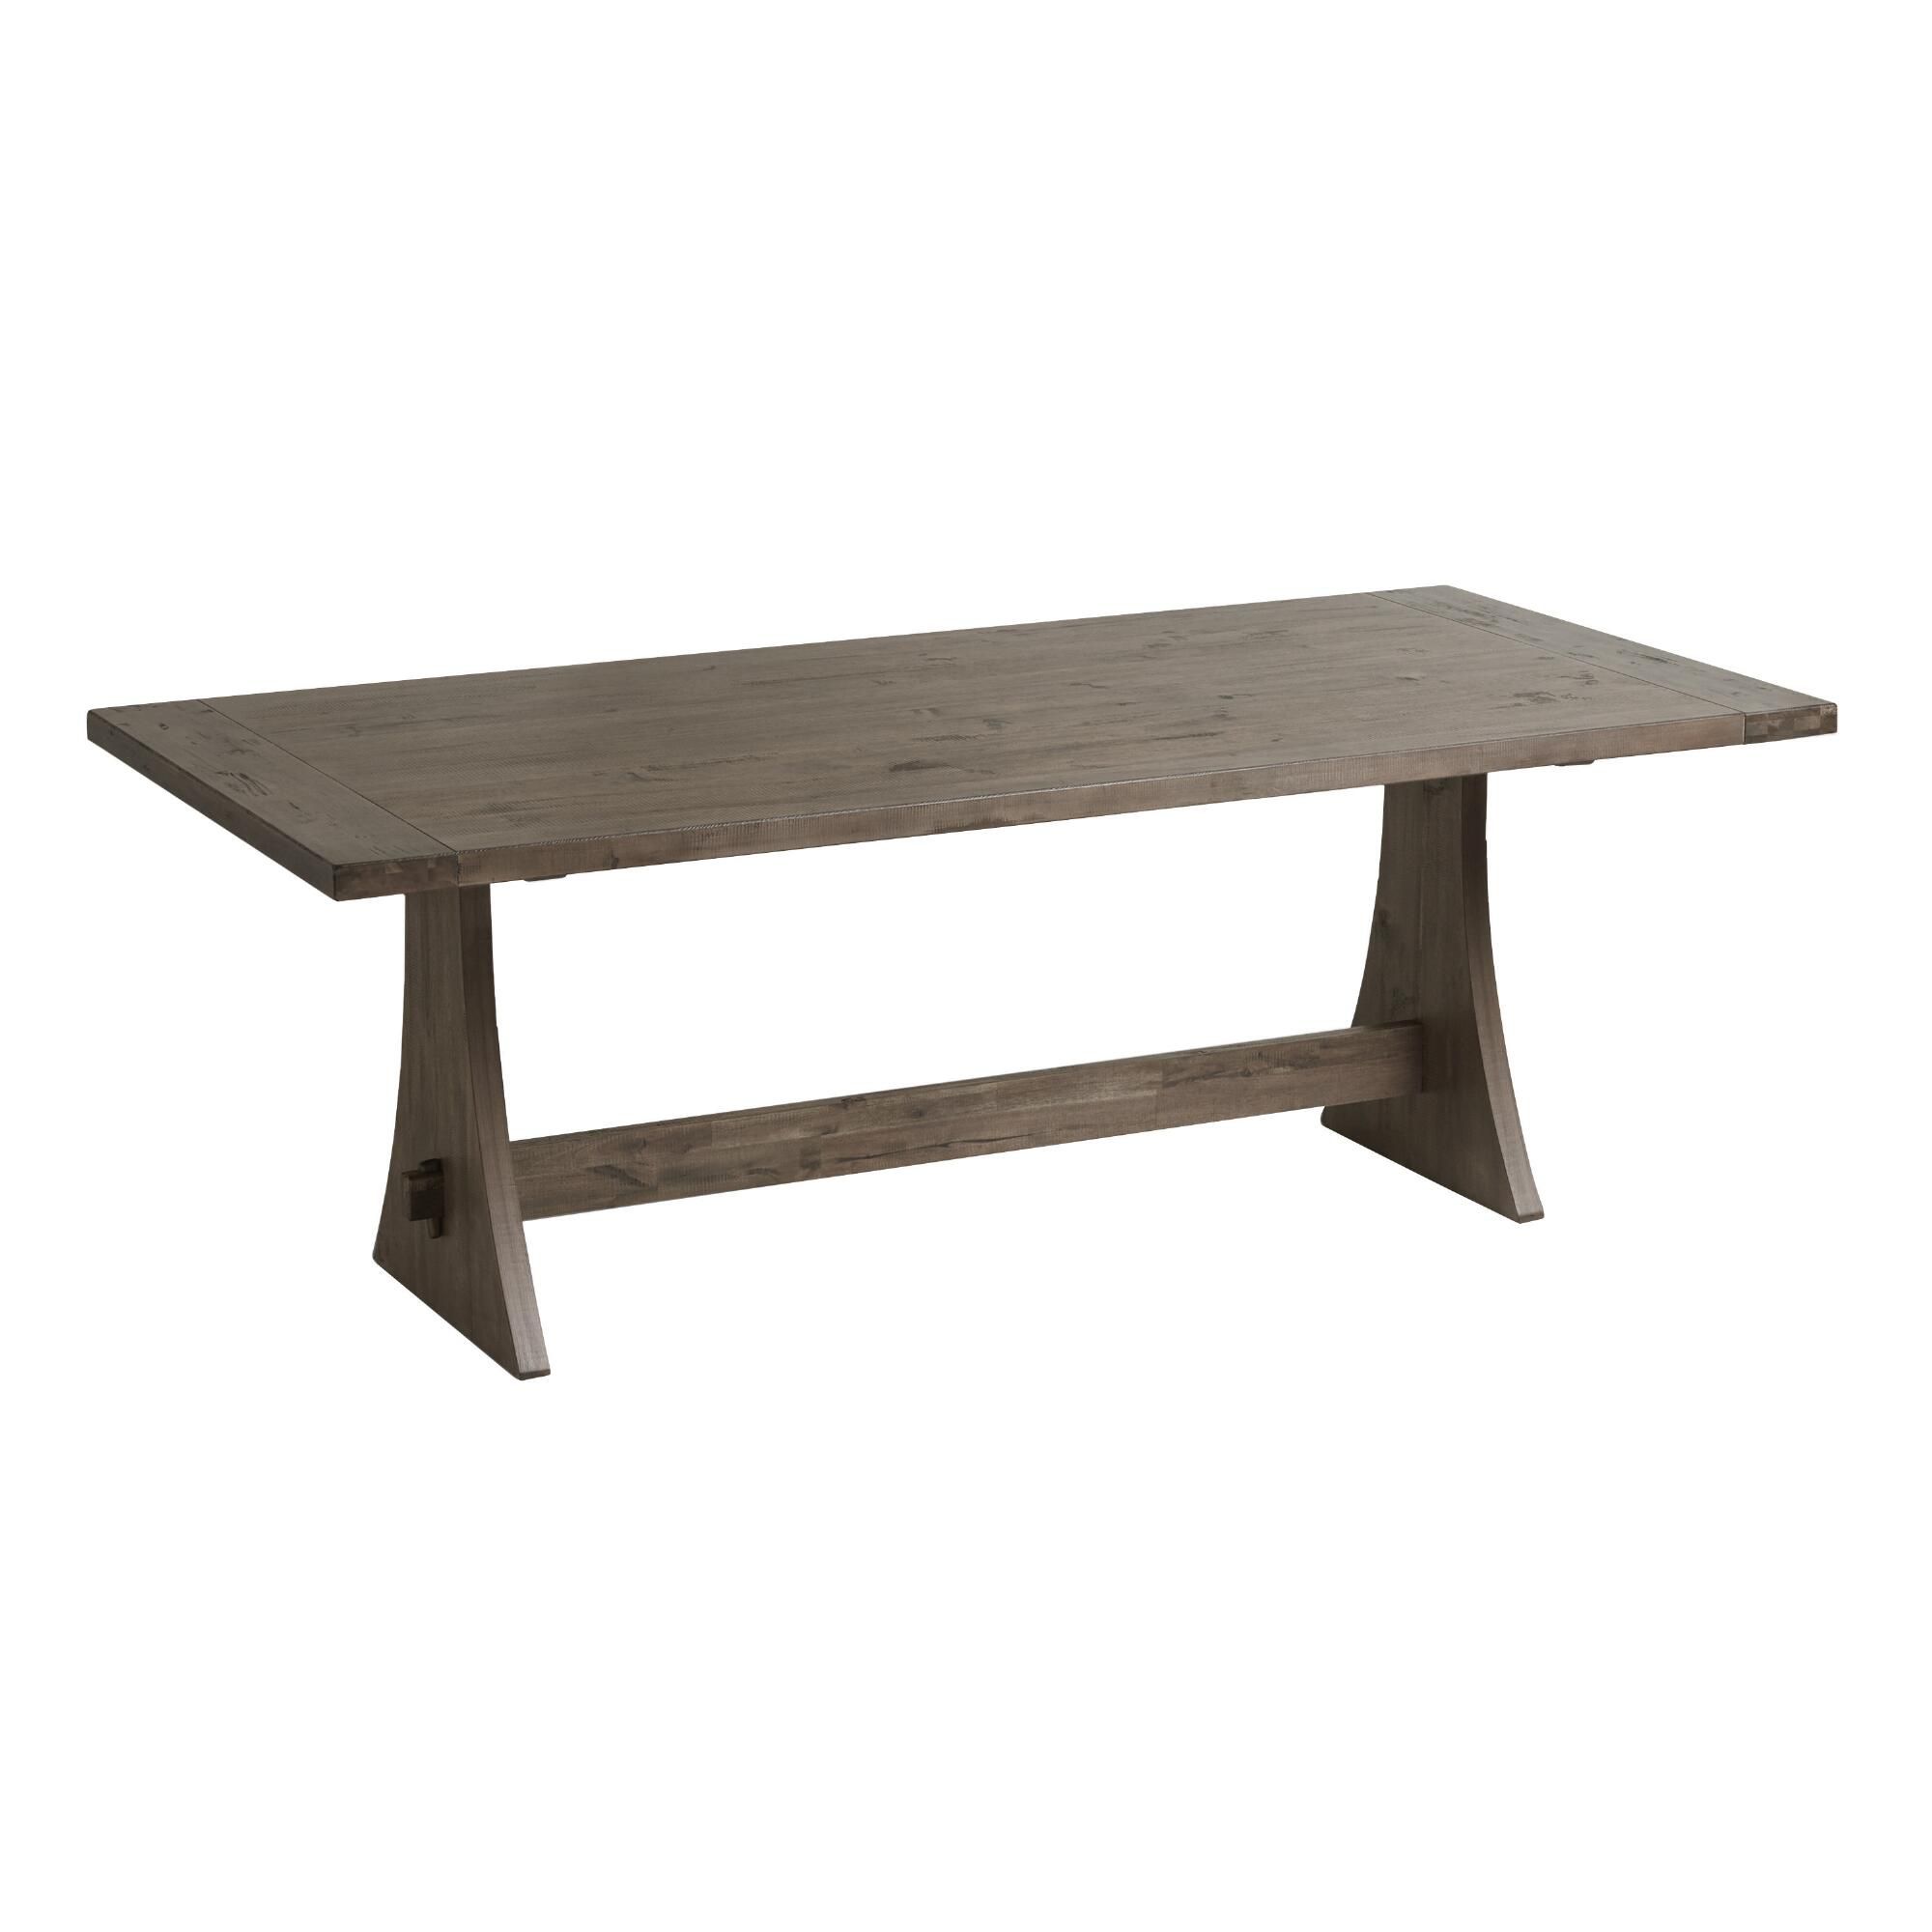 Rustic Wood Brinley Fixed Dining Table - Large (73"L and above) by World Market | World Market